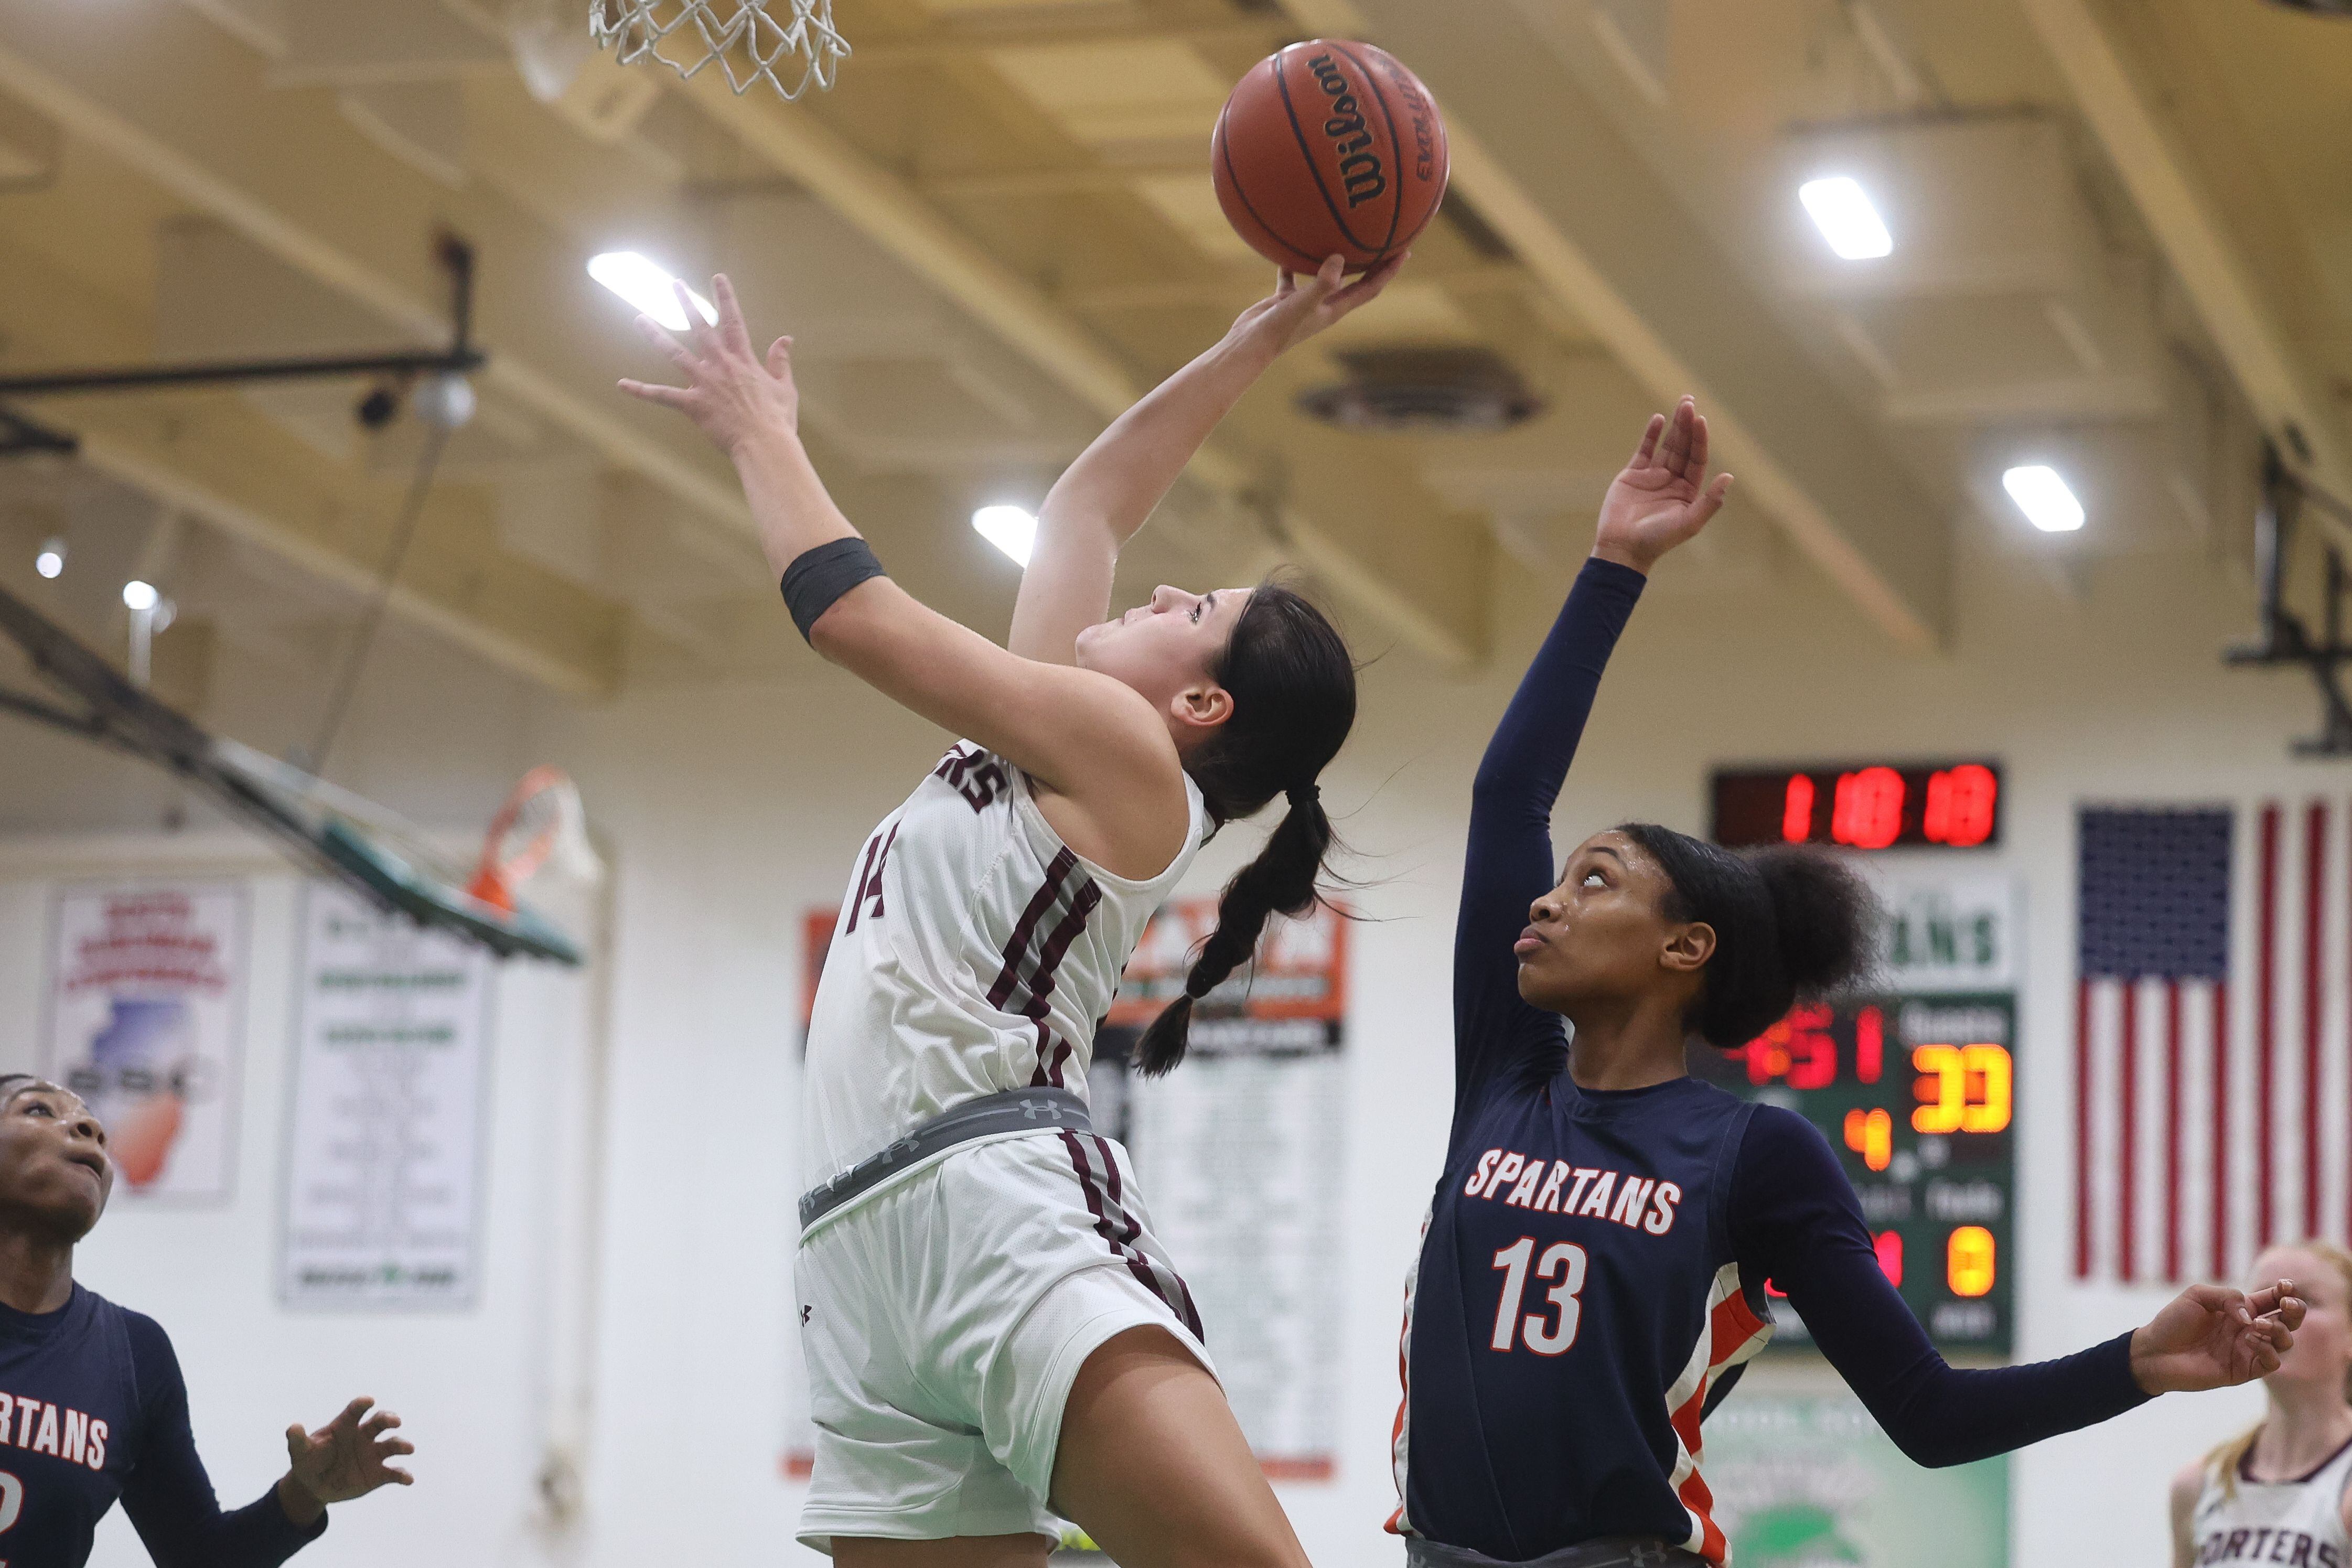 Lockport’s Veronica Bafia arcs for the shot against Romeoville in the Oak Lawn Holiday Tournament championship on Saturday, Dec.16th in Oak Lawn.